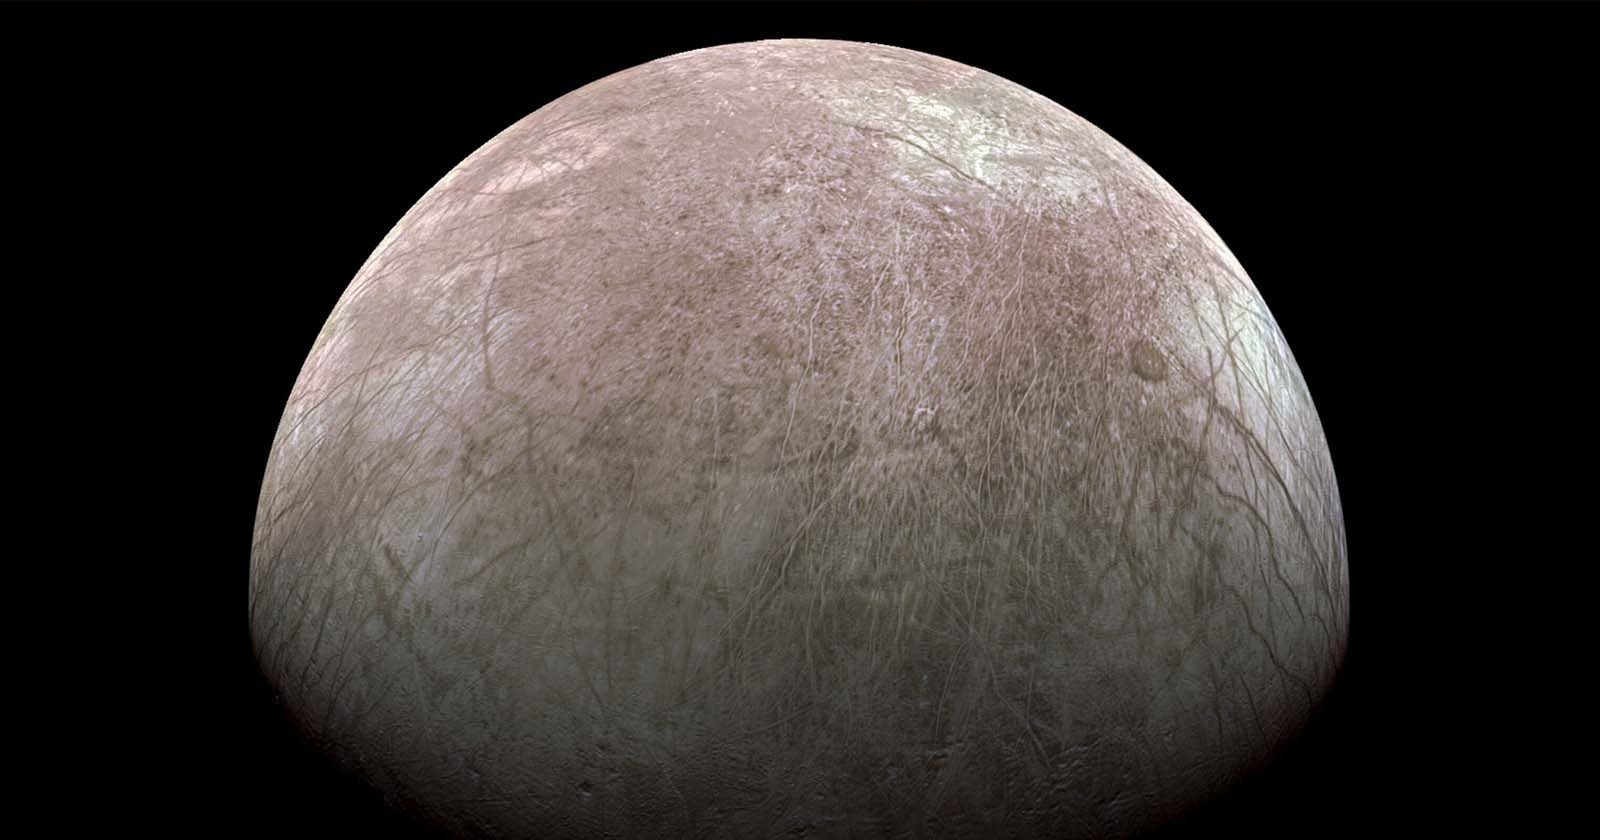 Newly Processed Images of Europa Show Details of the Icy Moon